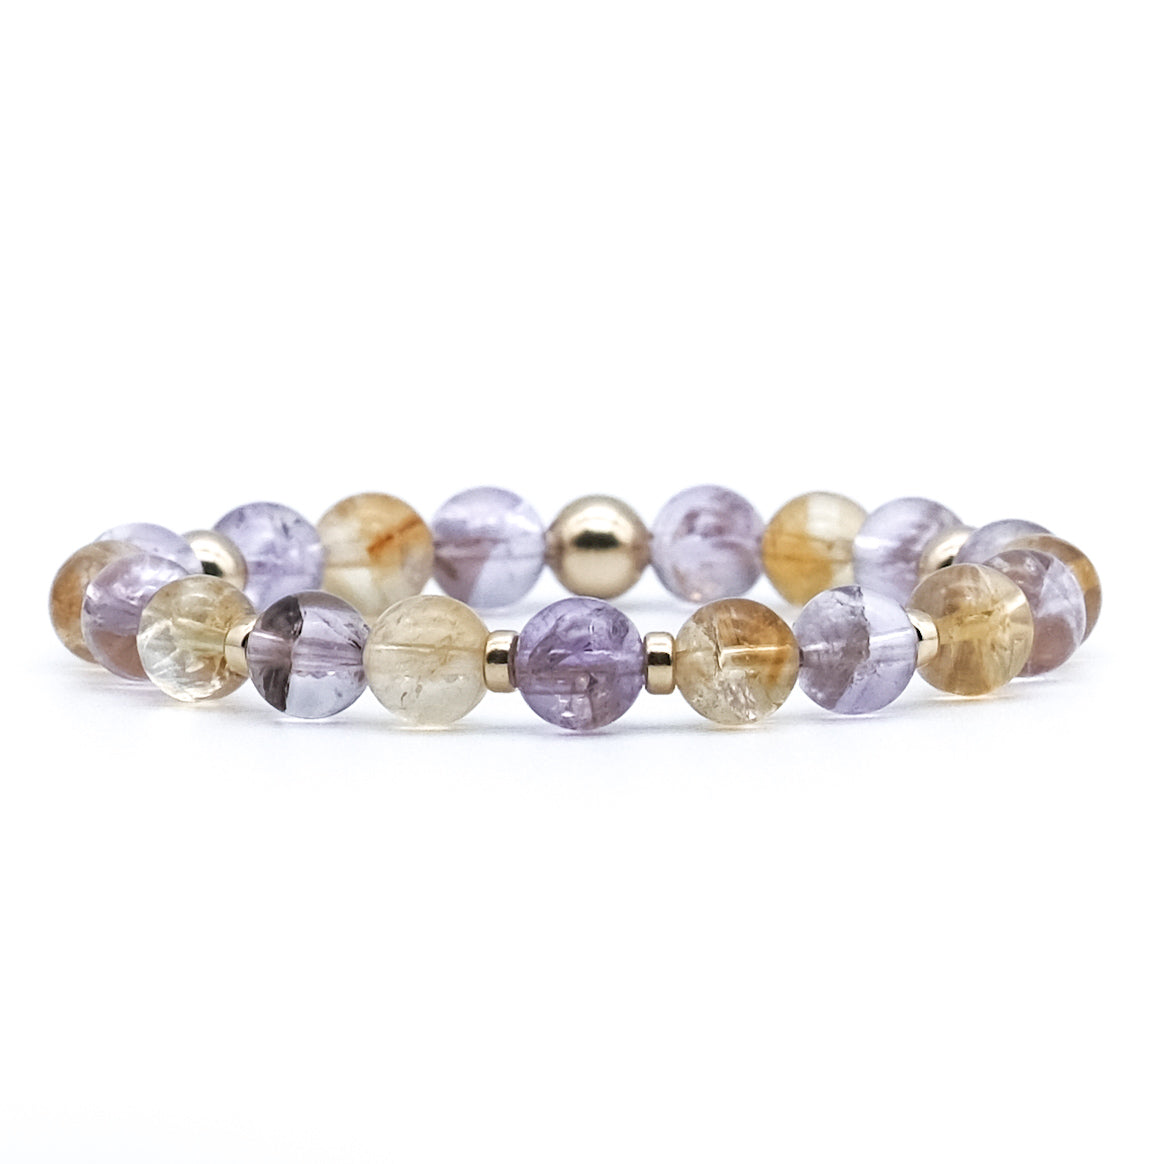 Amethyst and Citrine gemstone bracelet with 14kt gold filled accessories